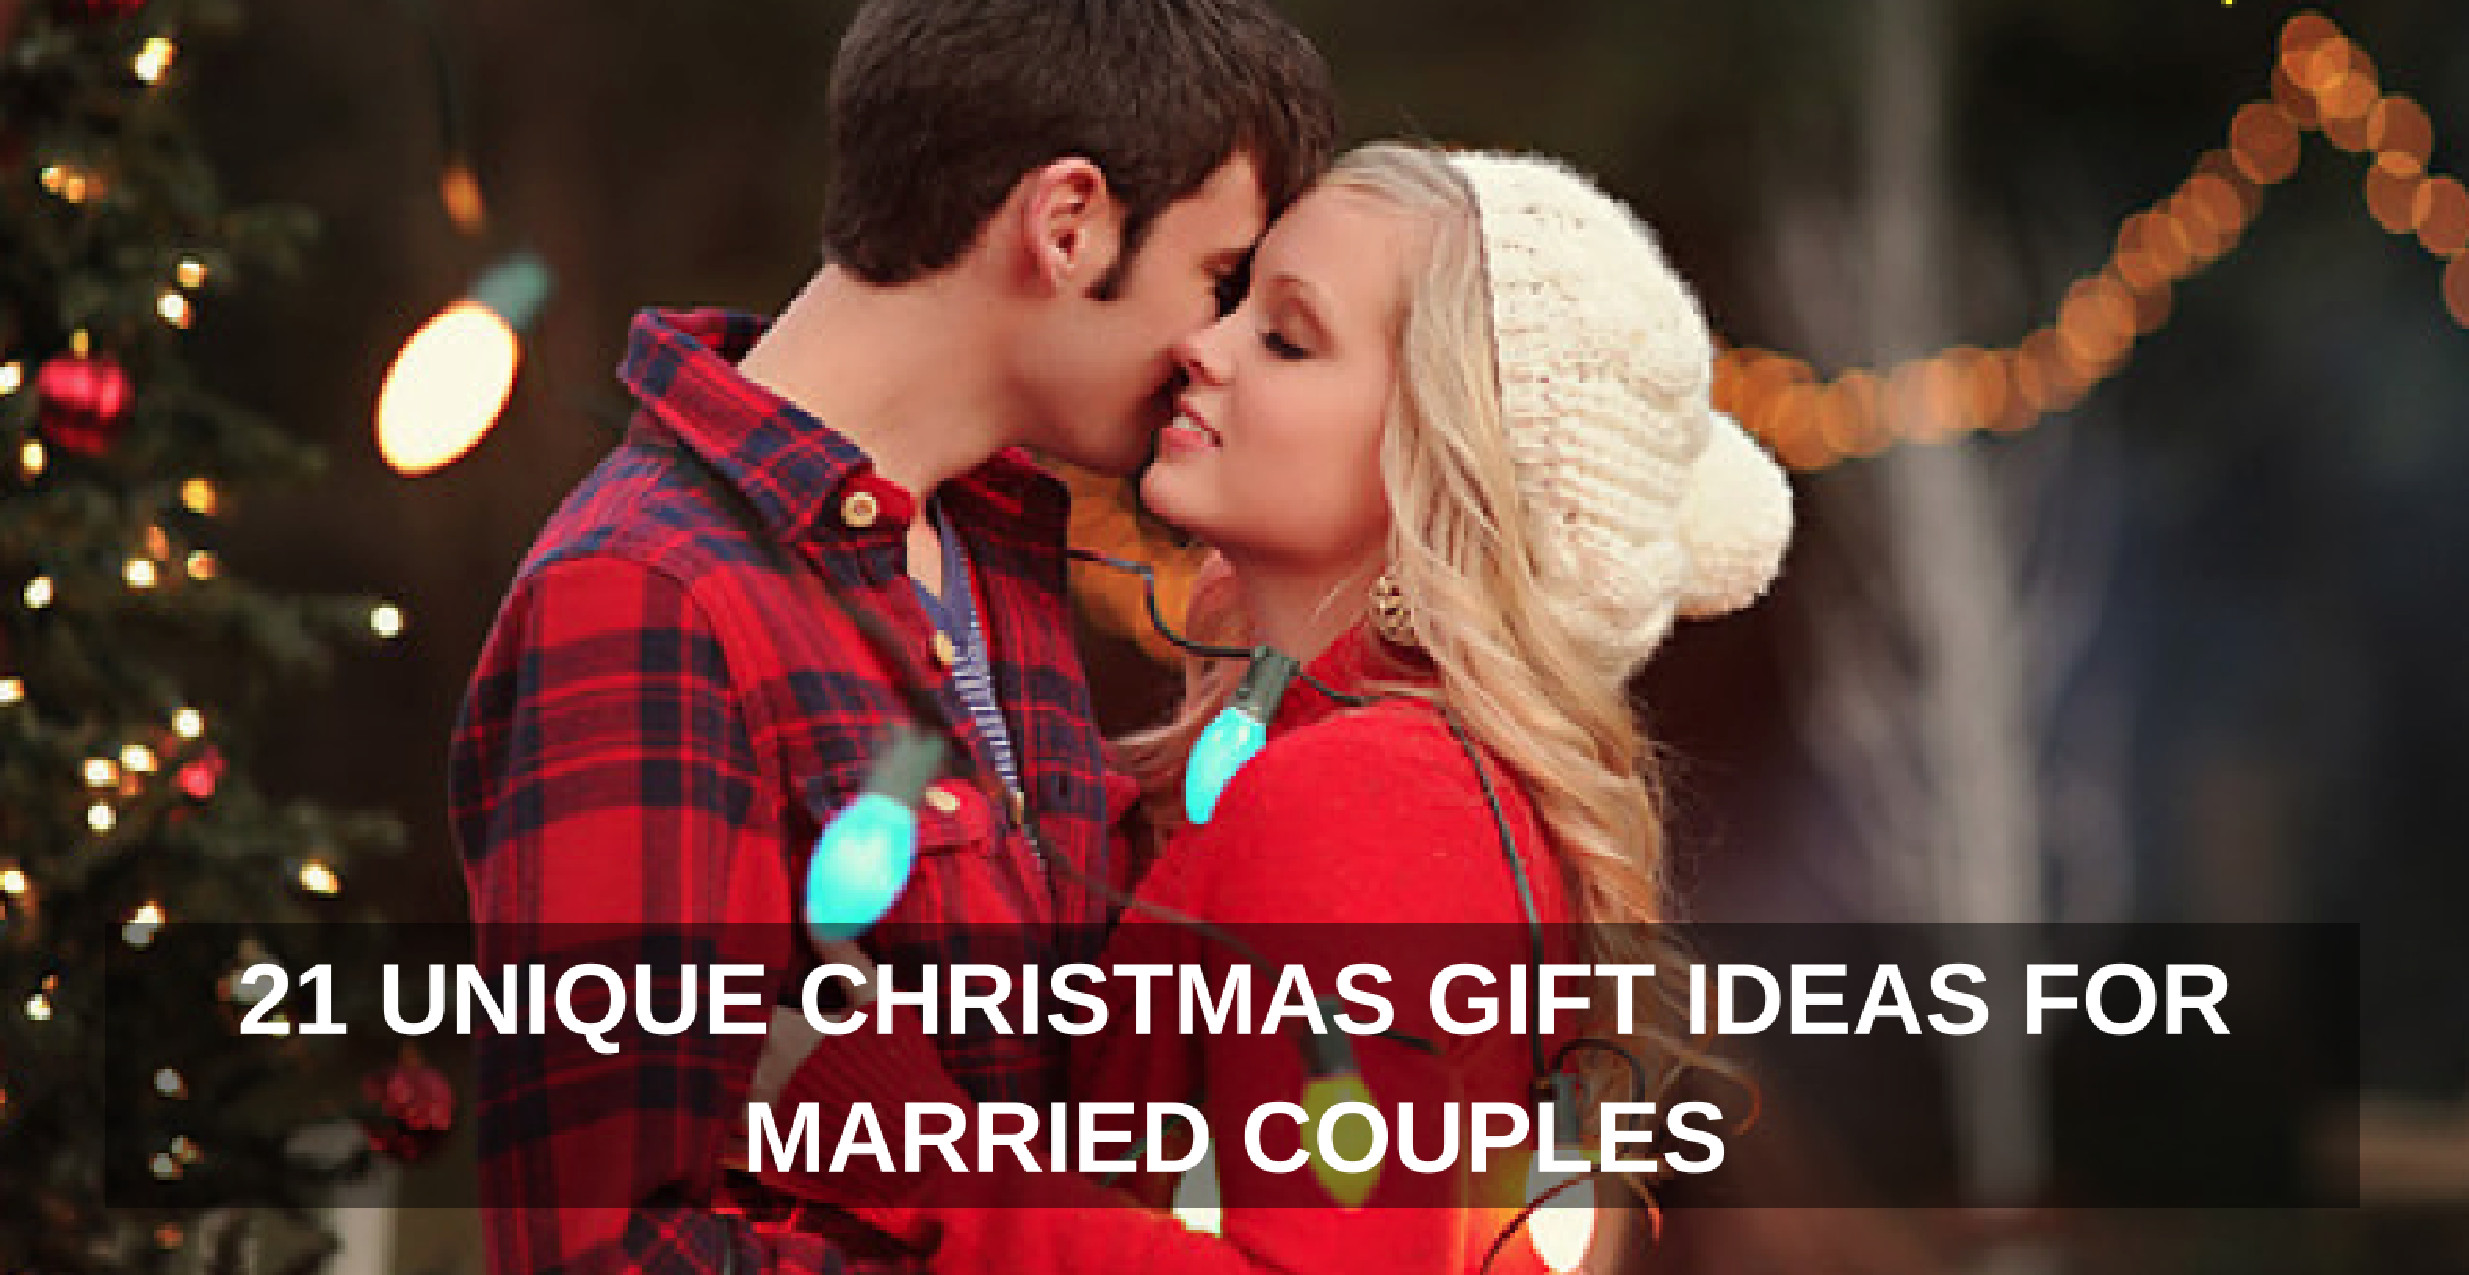 Christmas Gift Ideas For A Couple
 21 Unique Christmas Gift Ideas for Married Couples